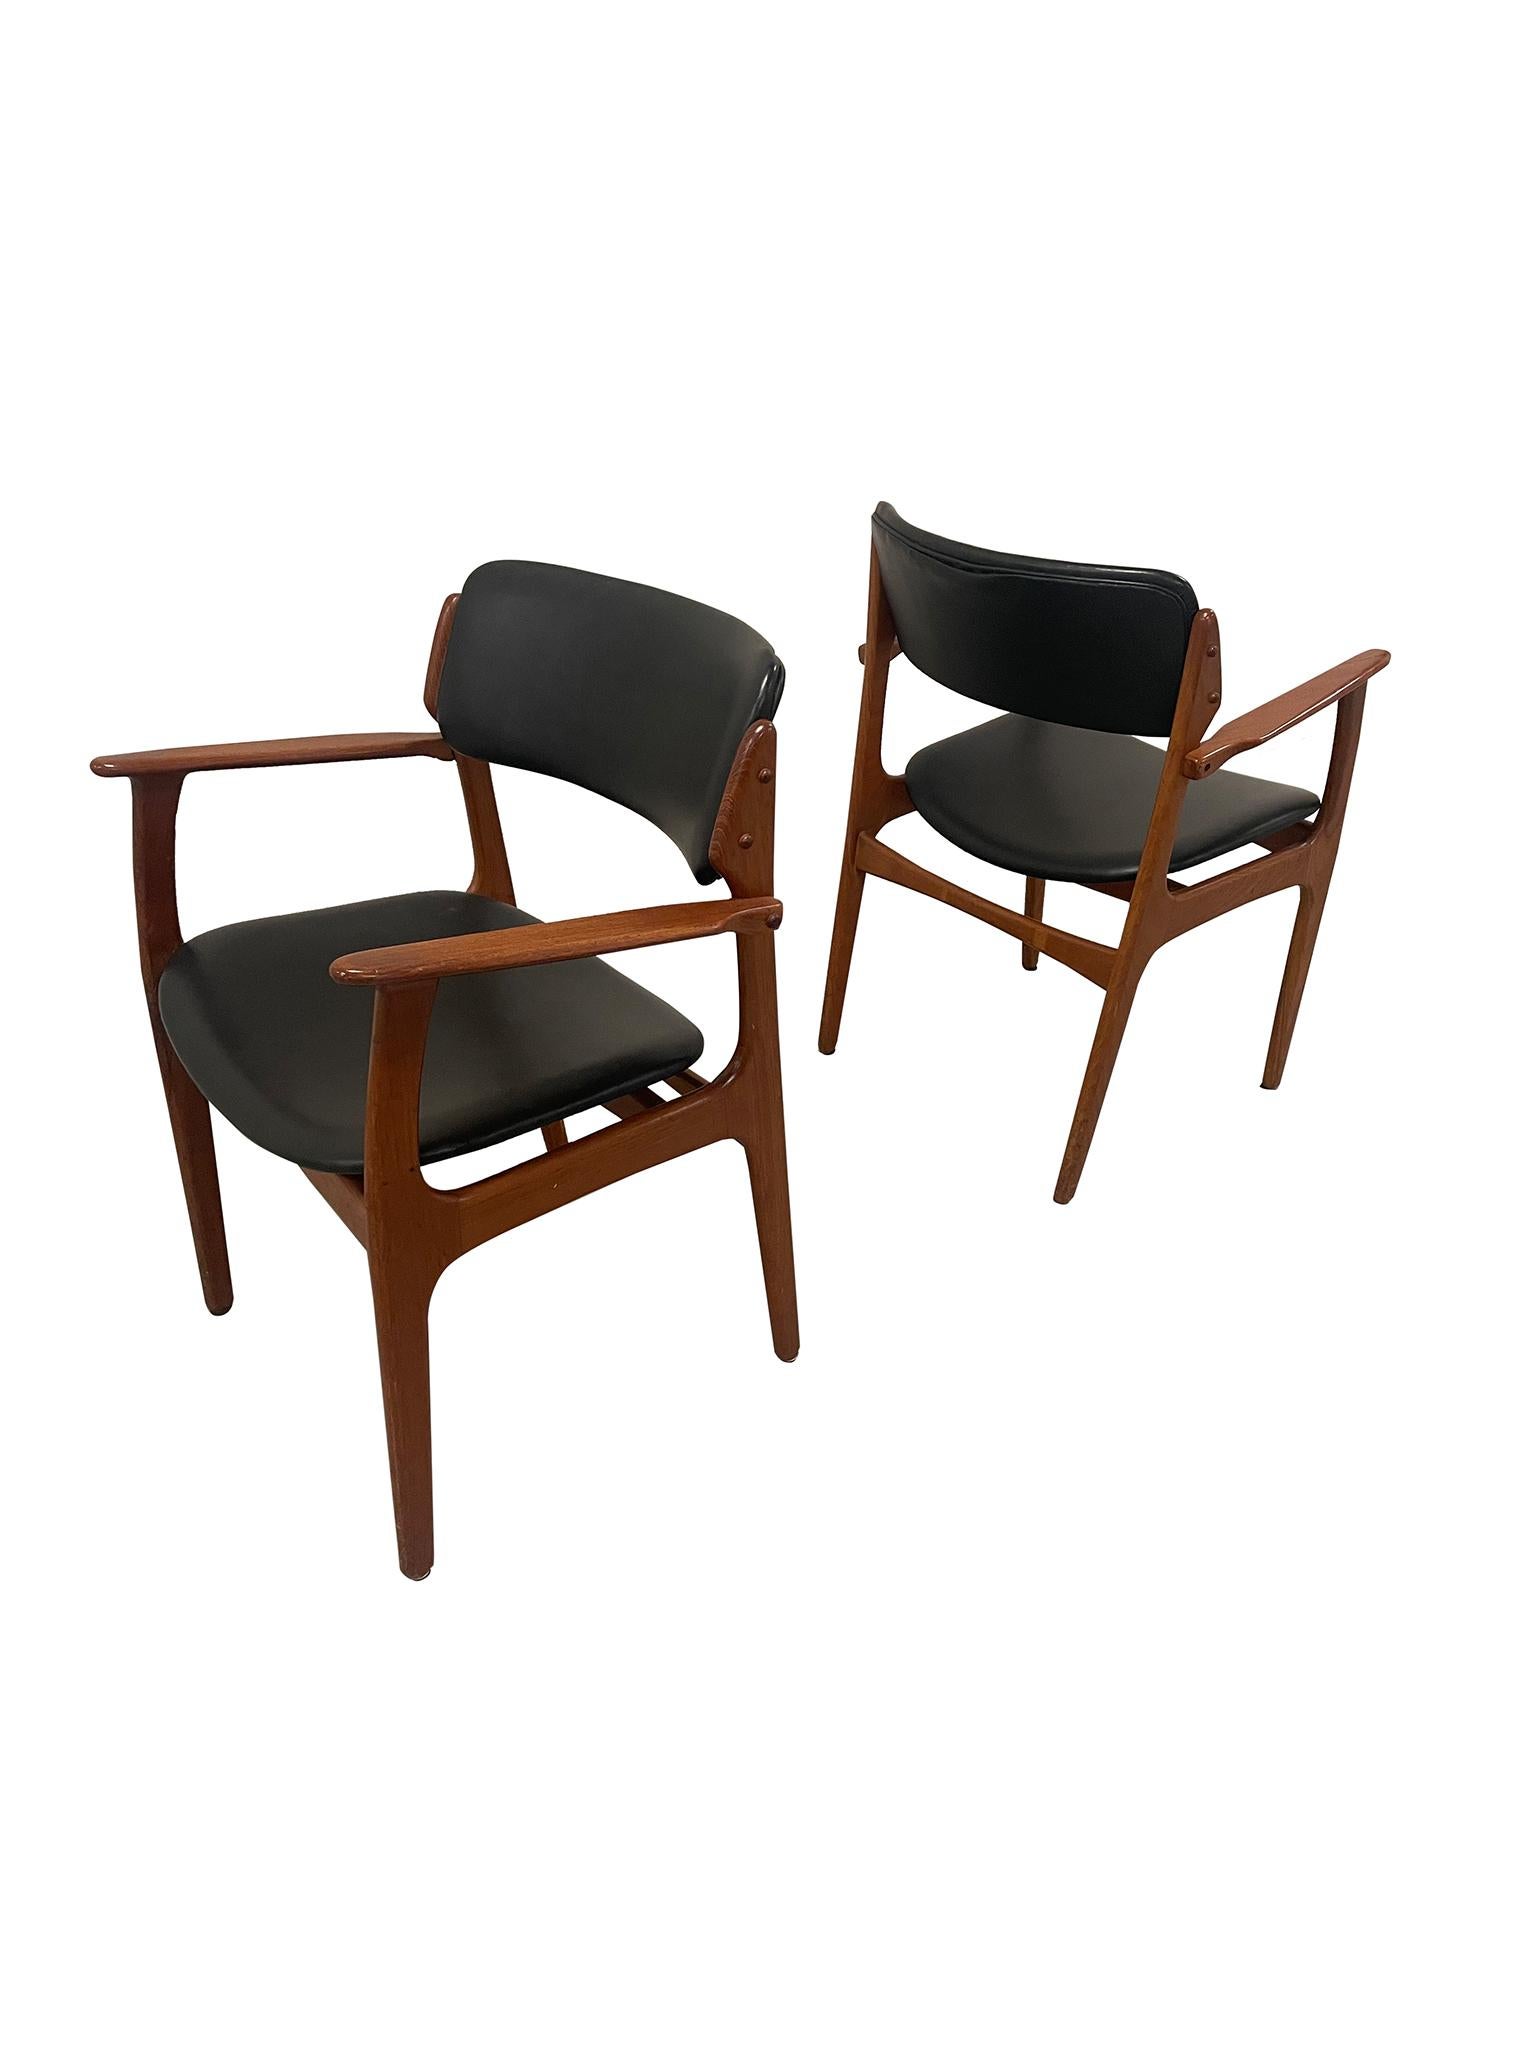 Amazing set of six Danish Modern dining armchairs by Erik Buch. Designed by Buck for  Oddense MaskinsnedkerI or OD Møbler, these armchairs are a fantastic example of Mid-century Danish design and craftsmanship. In their original state, these chairs